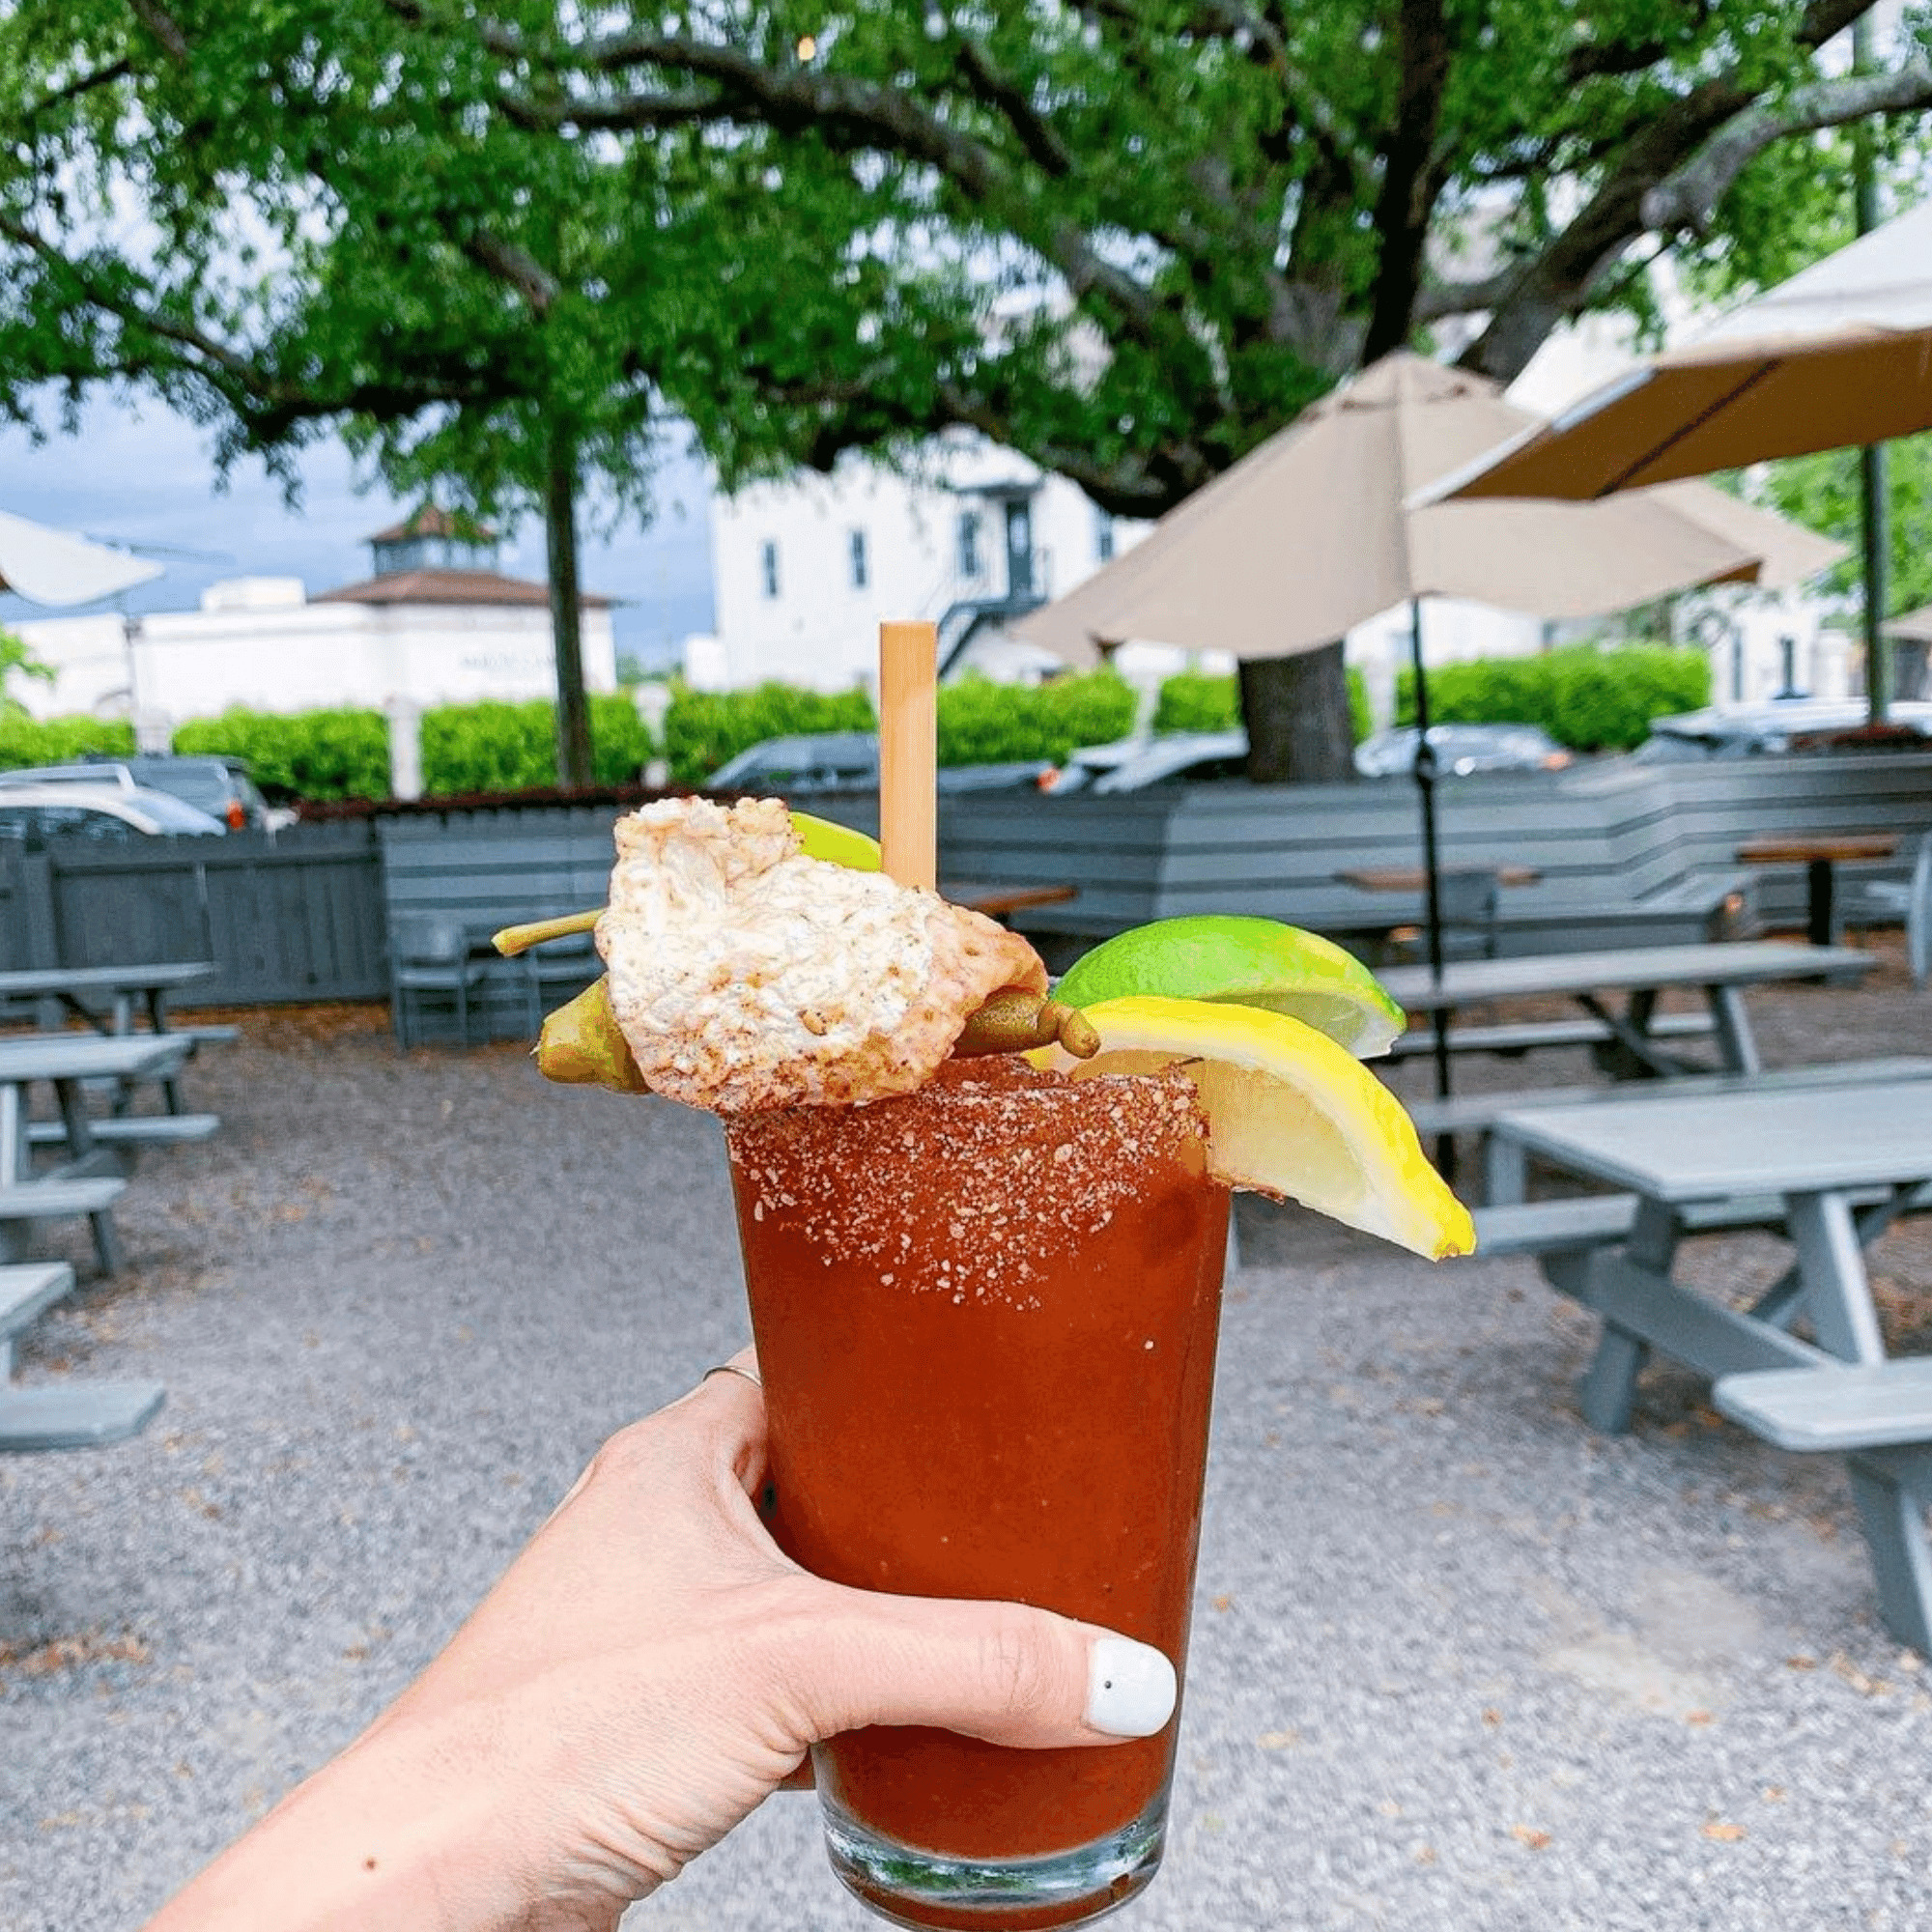 A hand is holding a Bloody Mary garnished with lime and lemon wedges, olives, and a piece of fried pork rind. The glass has a salted rim, and a bamboo-like straw made from reed stems is inserted into the drink. The setting is outdoors, with picnic tables and umbrellas in the background, creating a casual and relaxed atmosphere. The straw’s biodegradable material emphasizes sustainability while complementing the drink’s colorful and festive appearance.